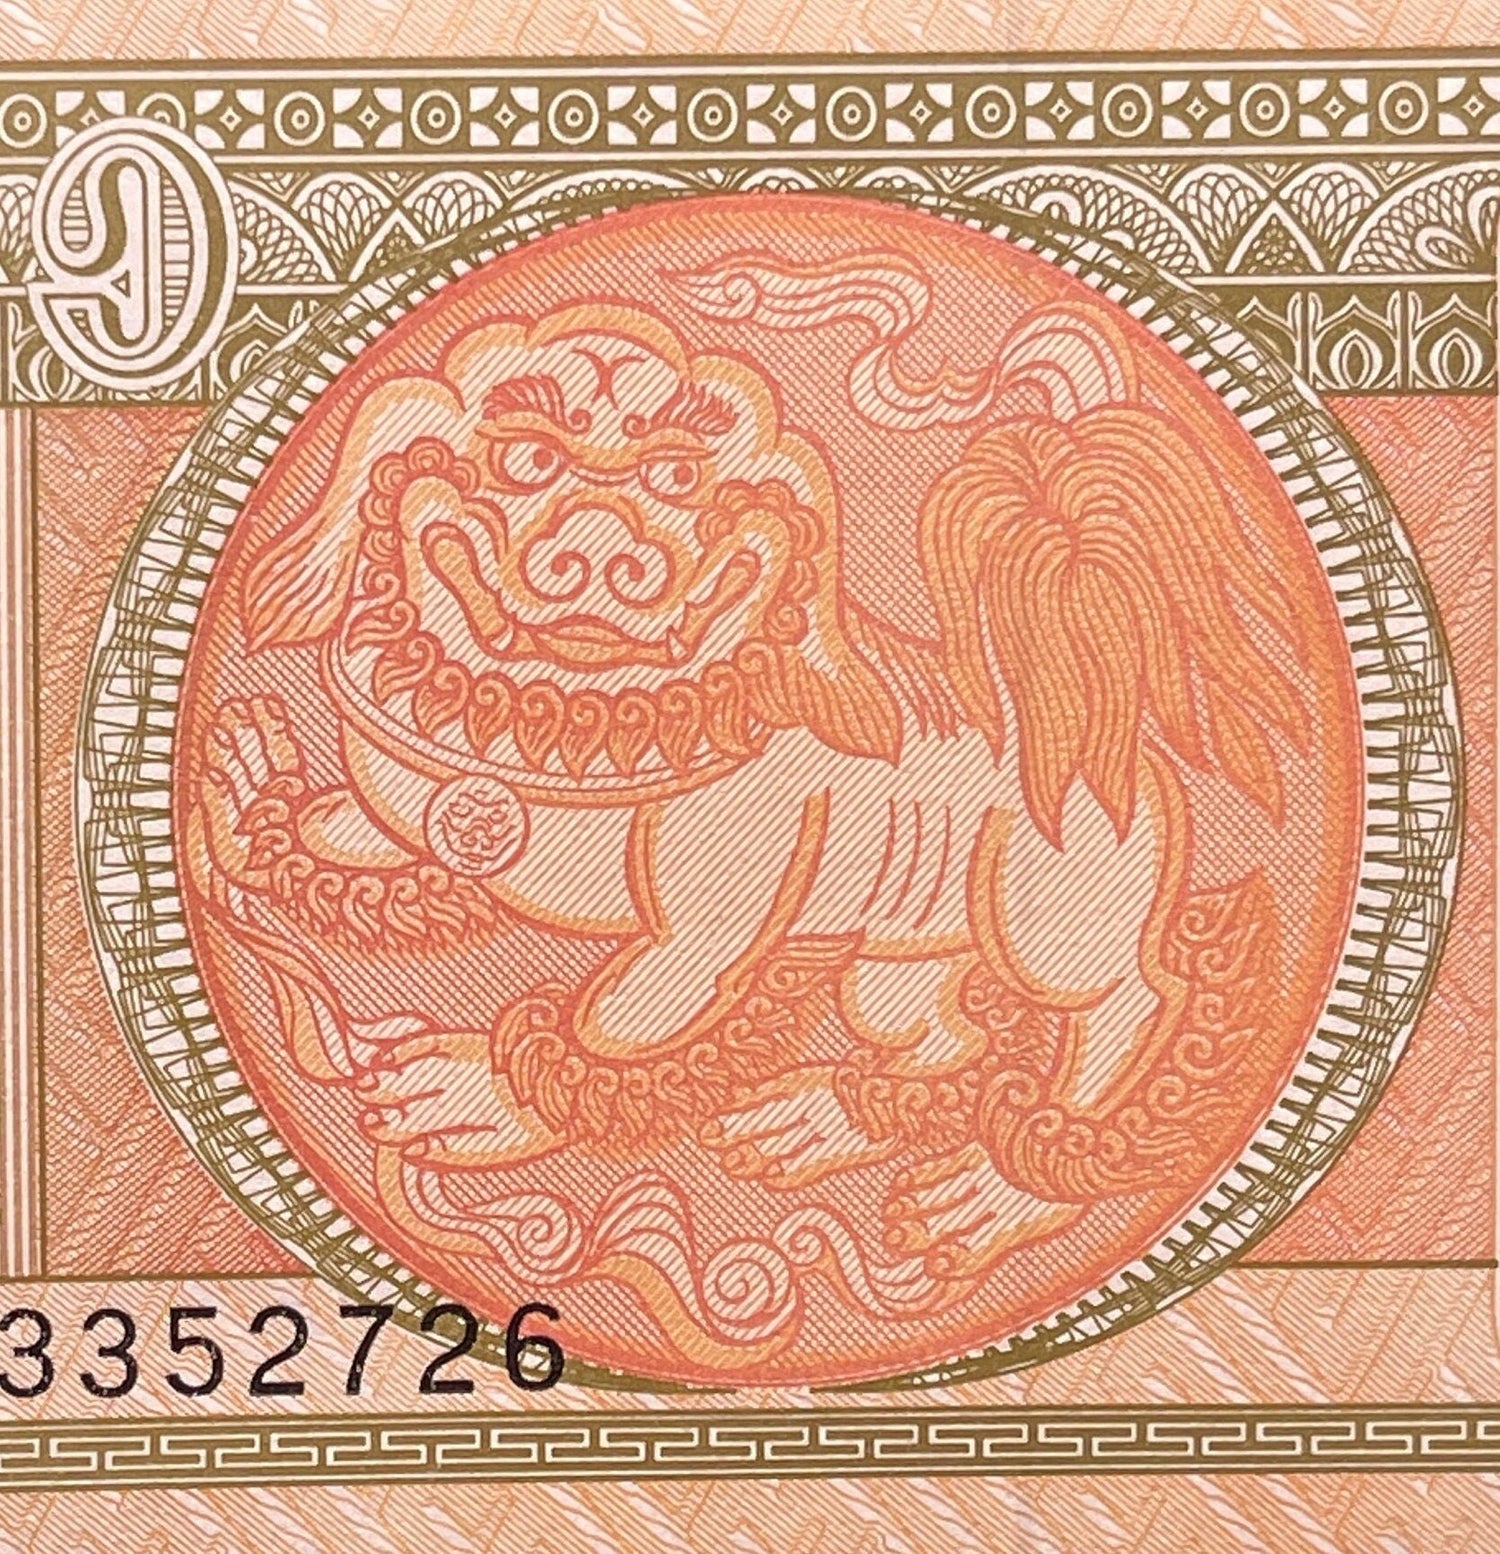 Chinthe Guardian Lion & Soyombo 1 Tögrög Mongolia Authentic Banknote Money for Jewelry and Collage (Paiza) (Genghis Khan)